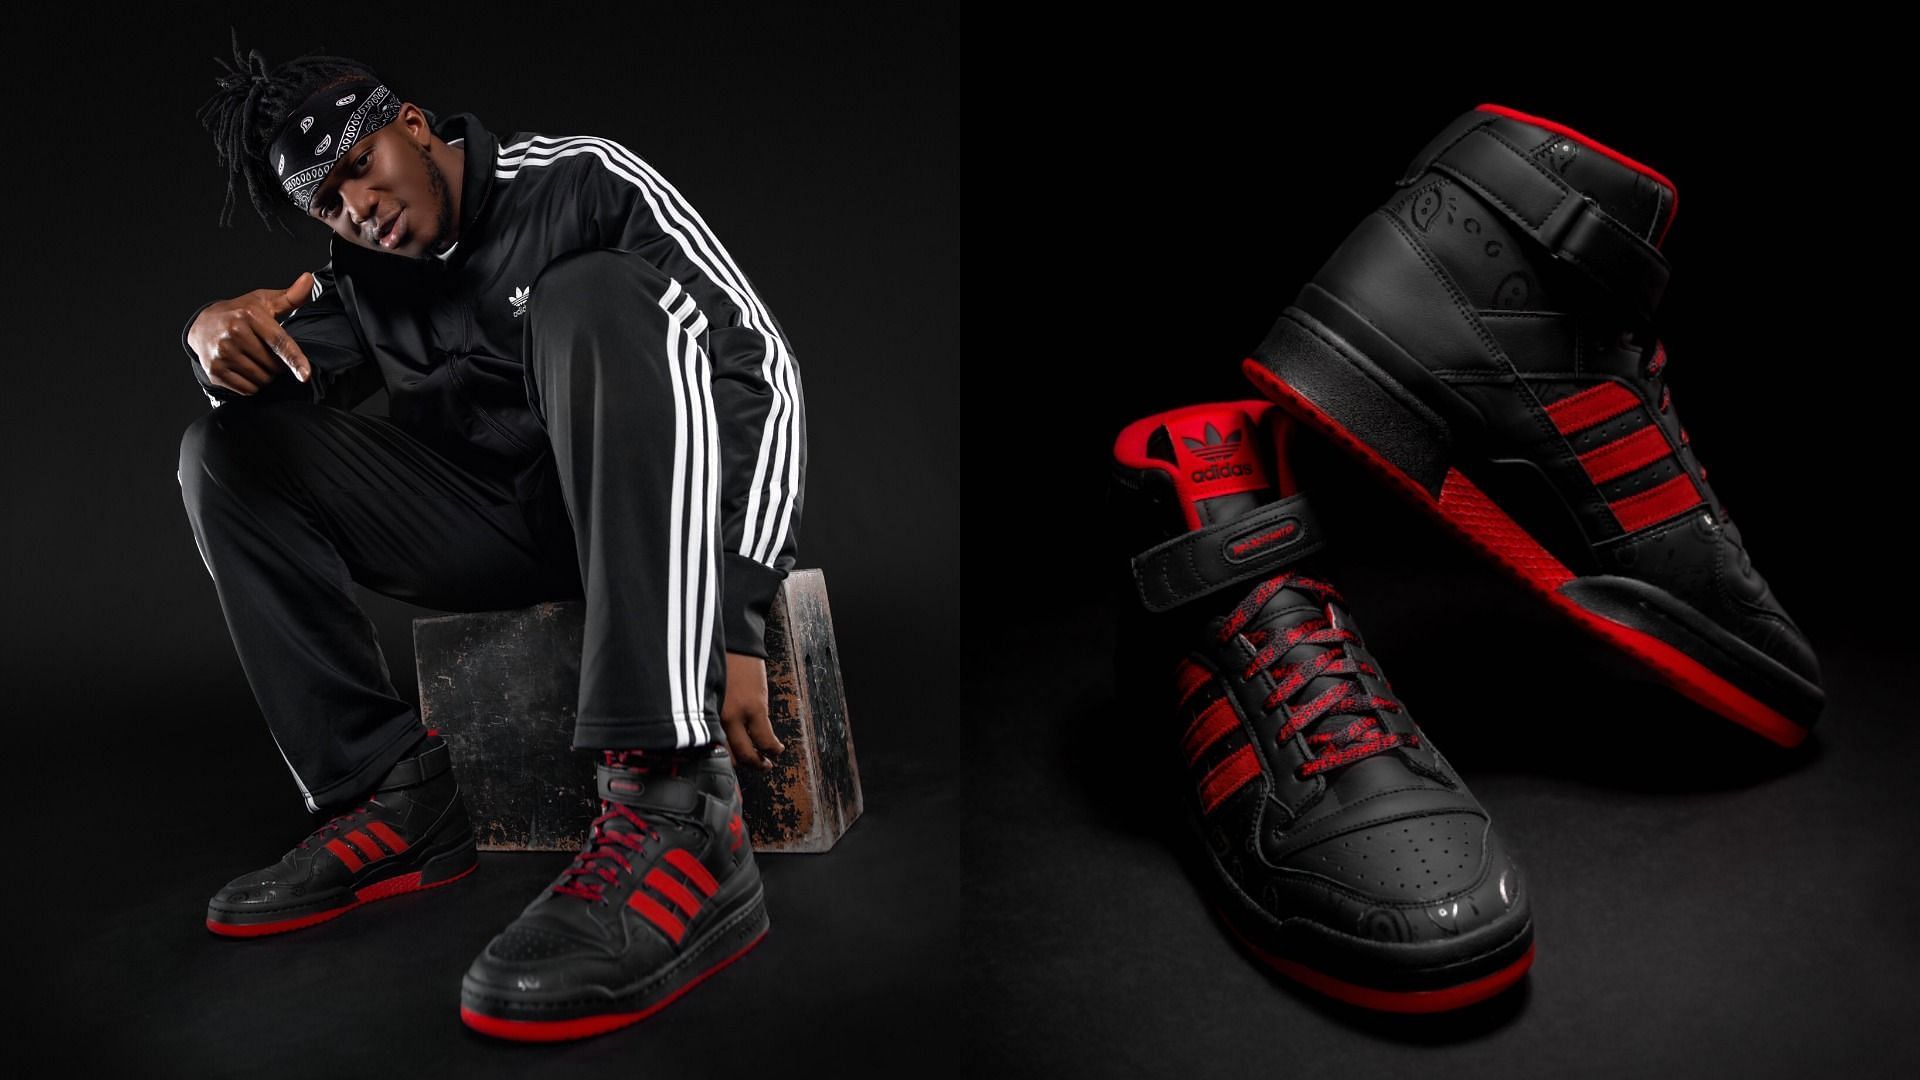 KSI&#039;s Adidas collection, launched on April 8, sells out in record time (Image via Ashley Verse/Adidas)